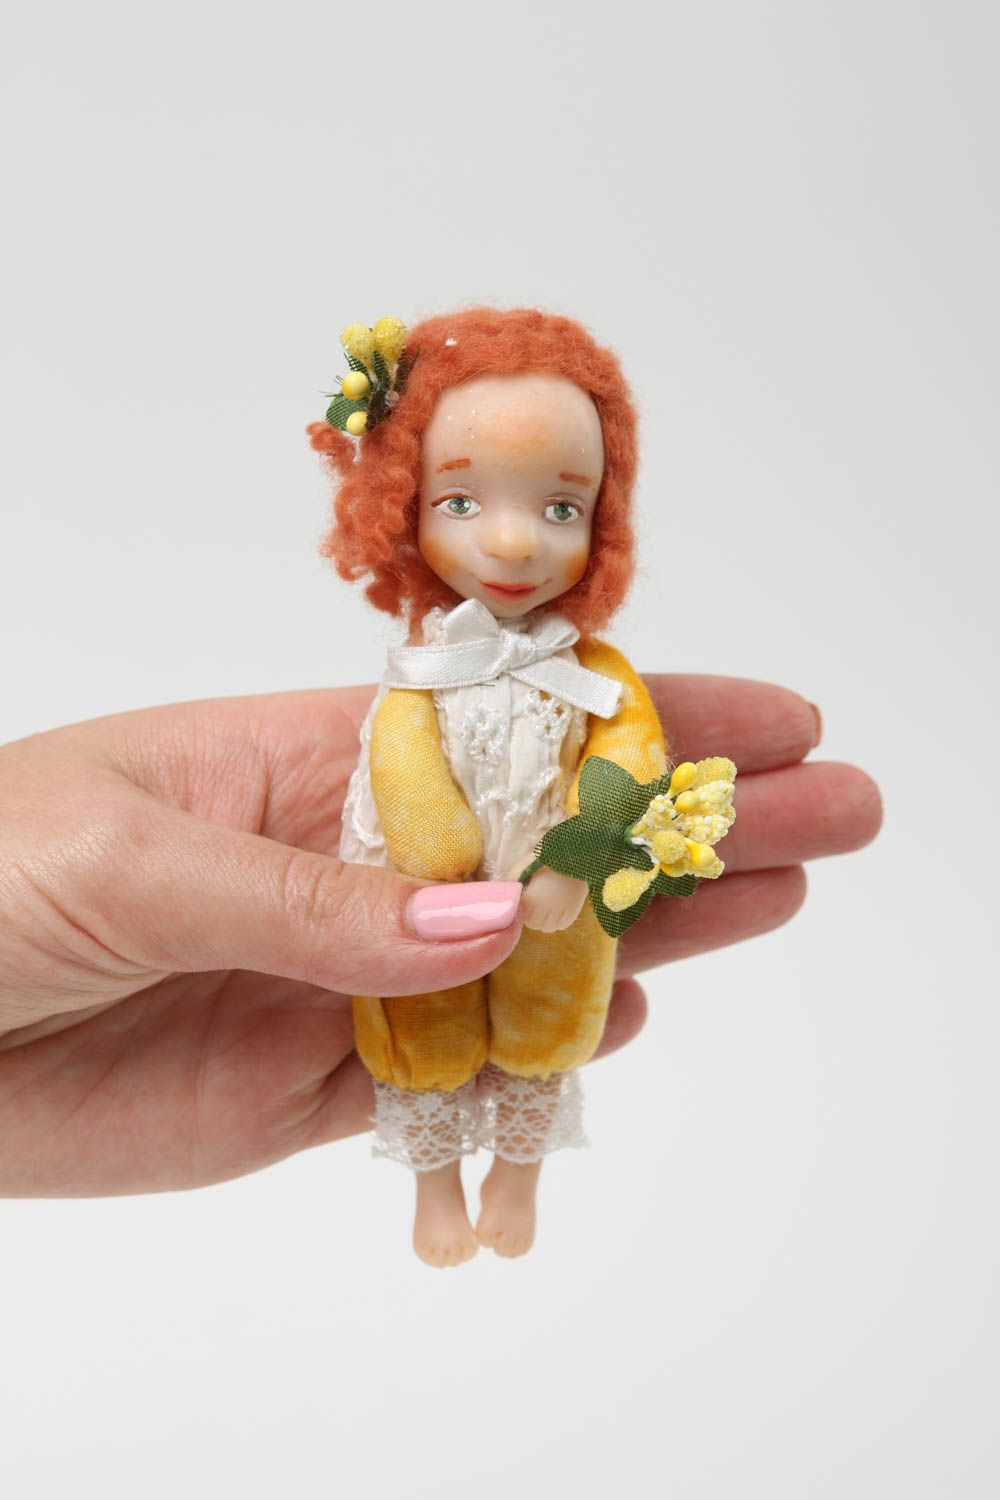 Handmade plastic doll collectible doll for kids nursery decor present for girl photo 5